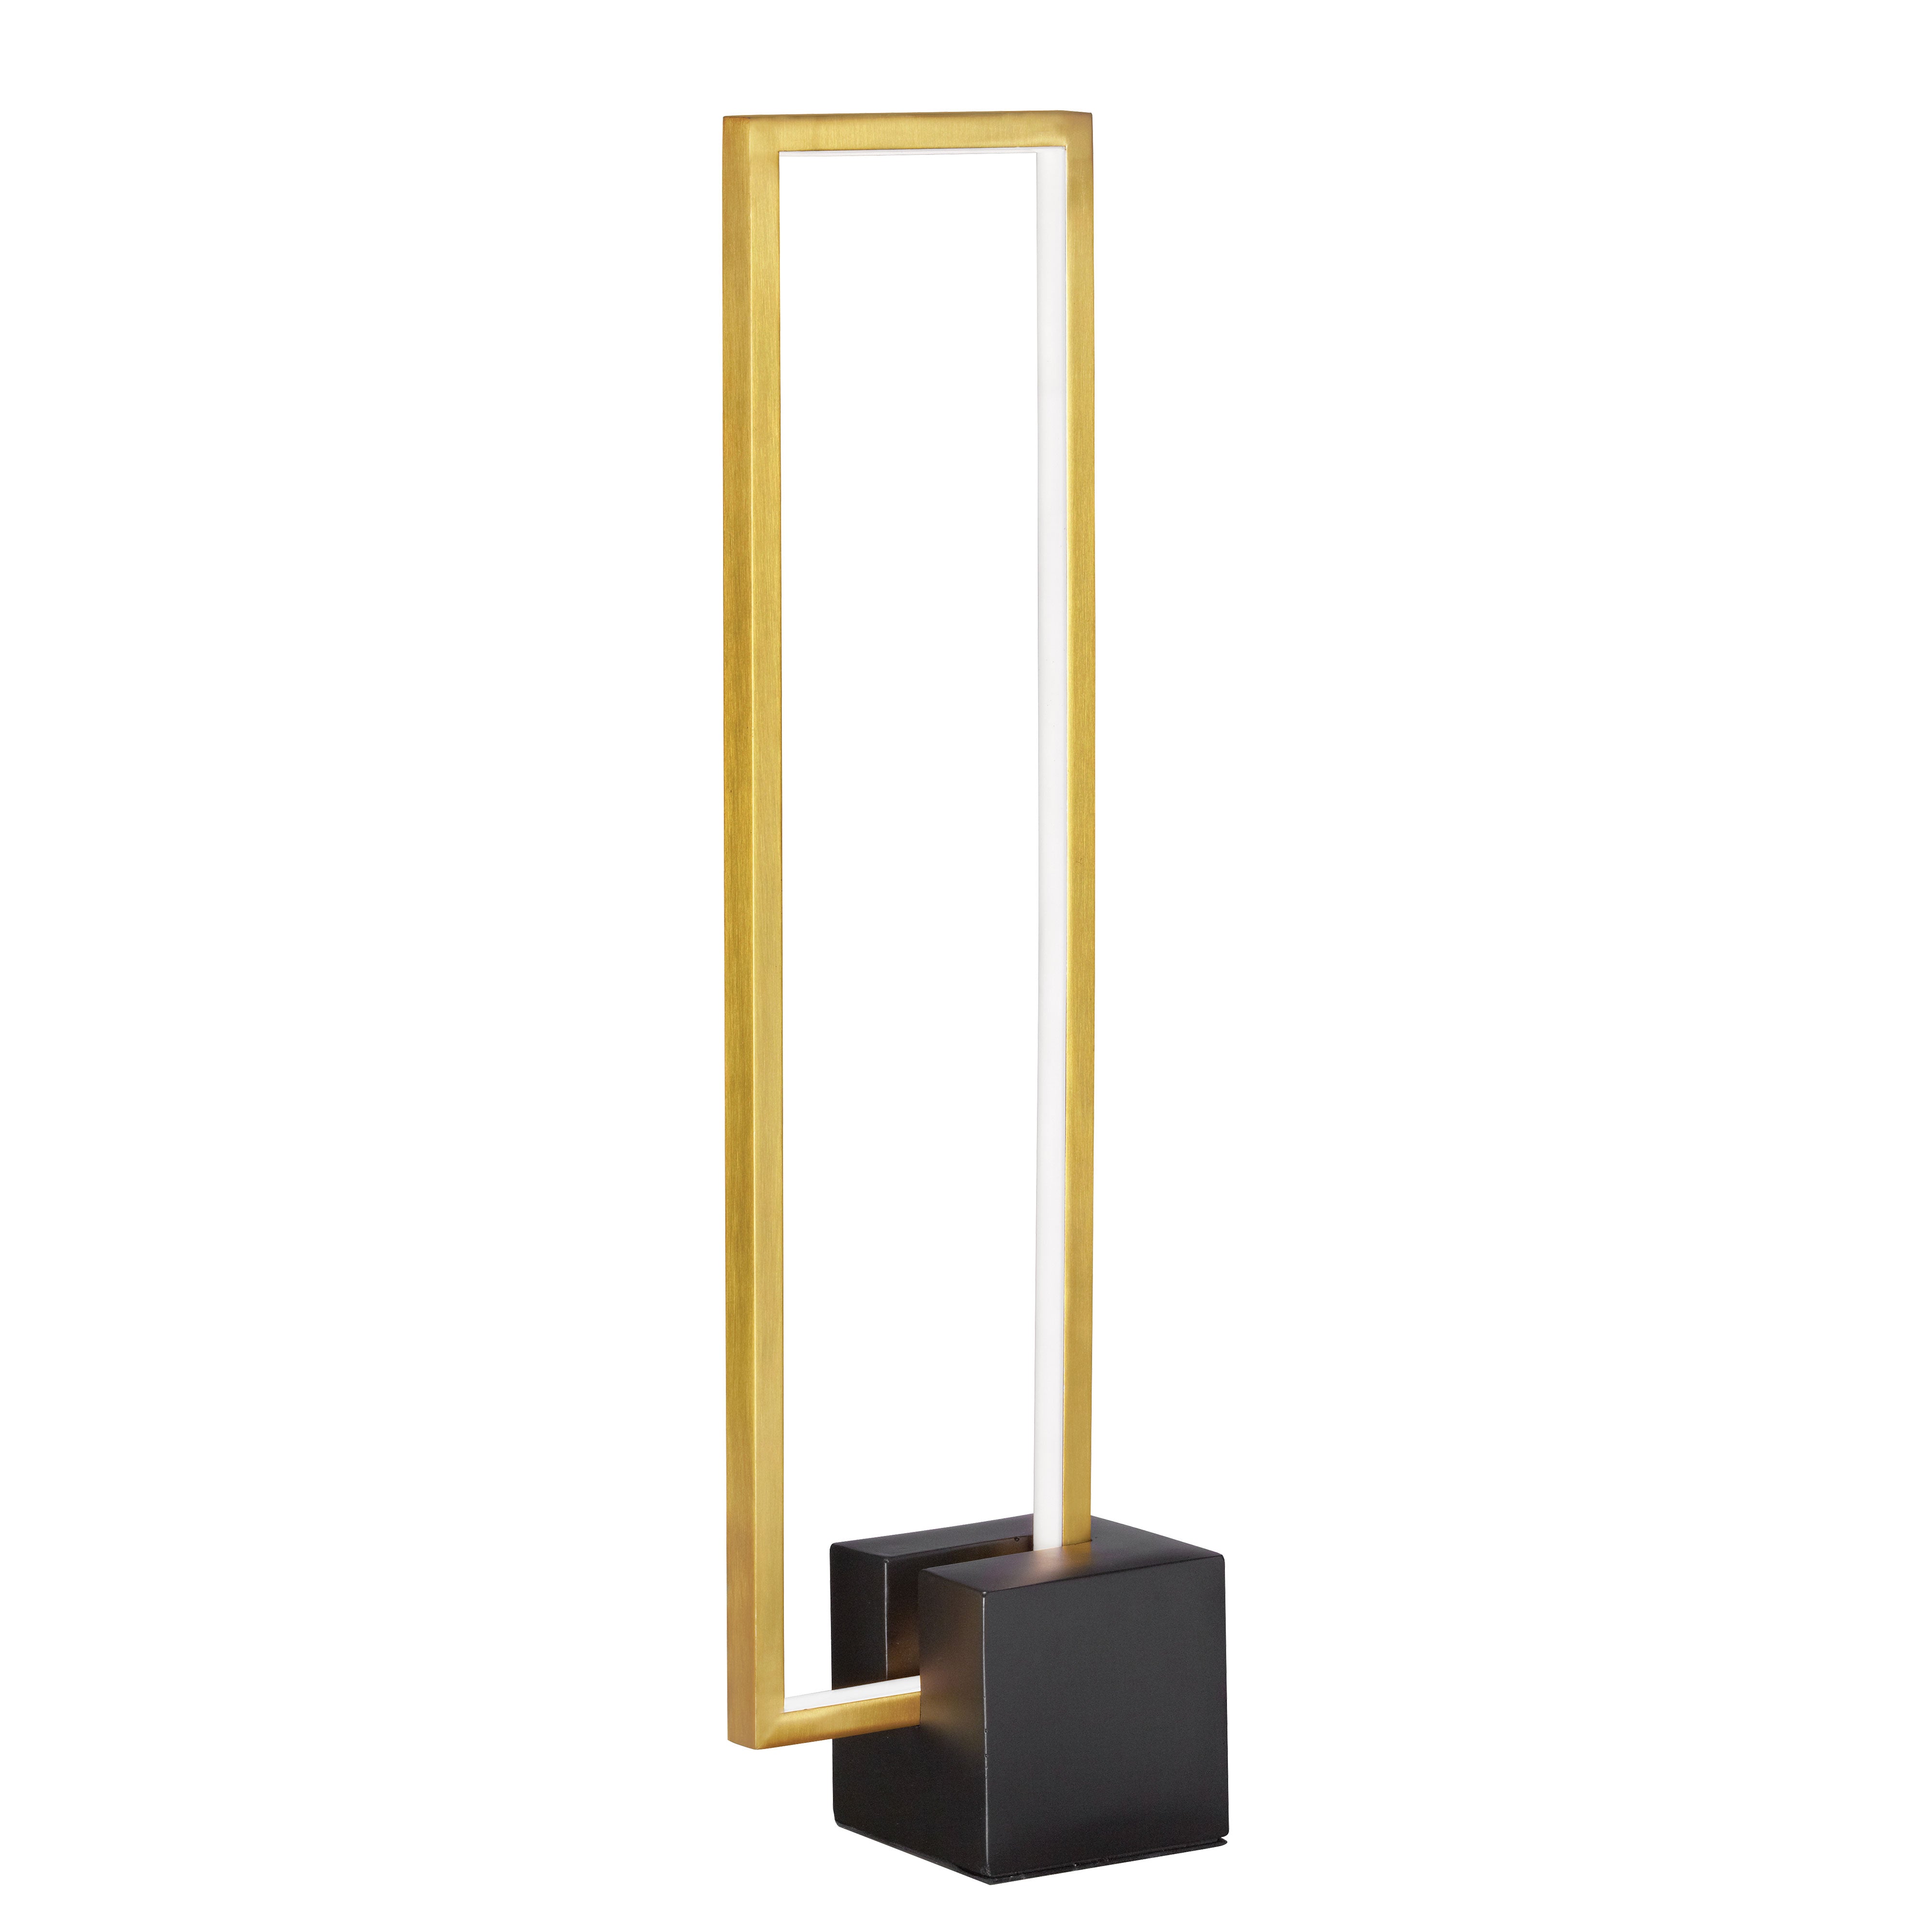 FLORENCE Table lamp Gold INTEGRATED LED - FLN-LEDT25-AGB-MB | DAINOLITE